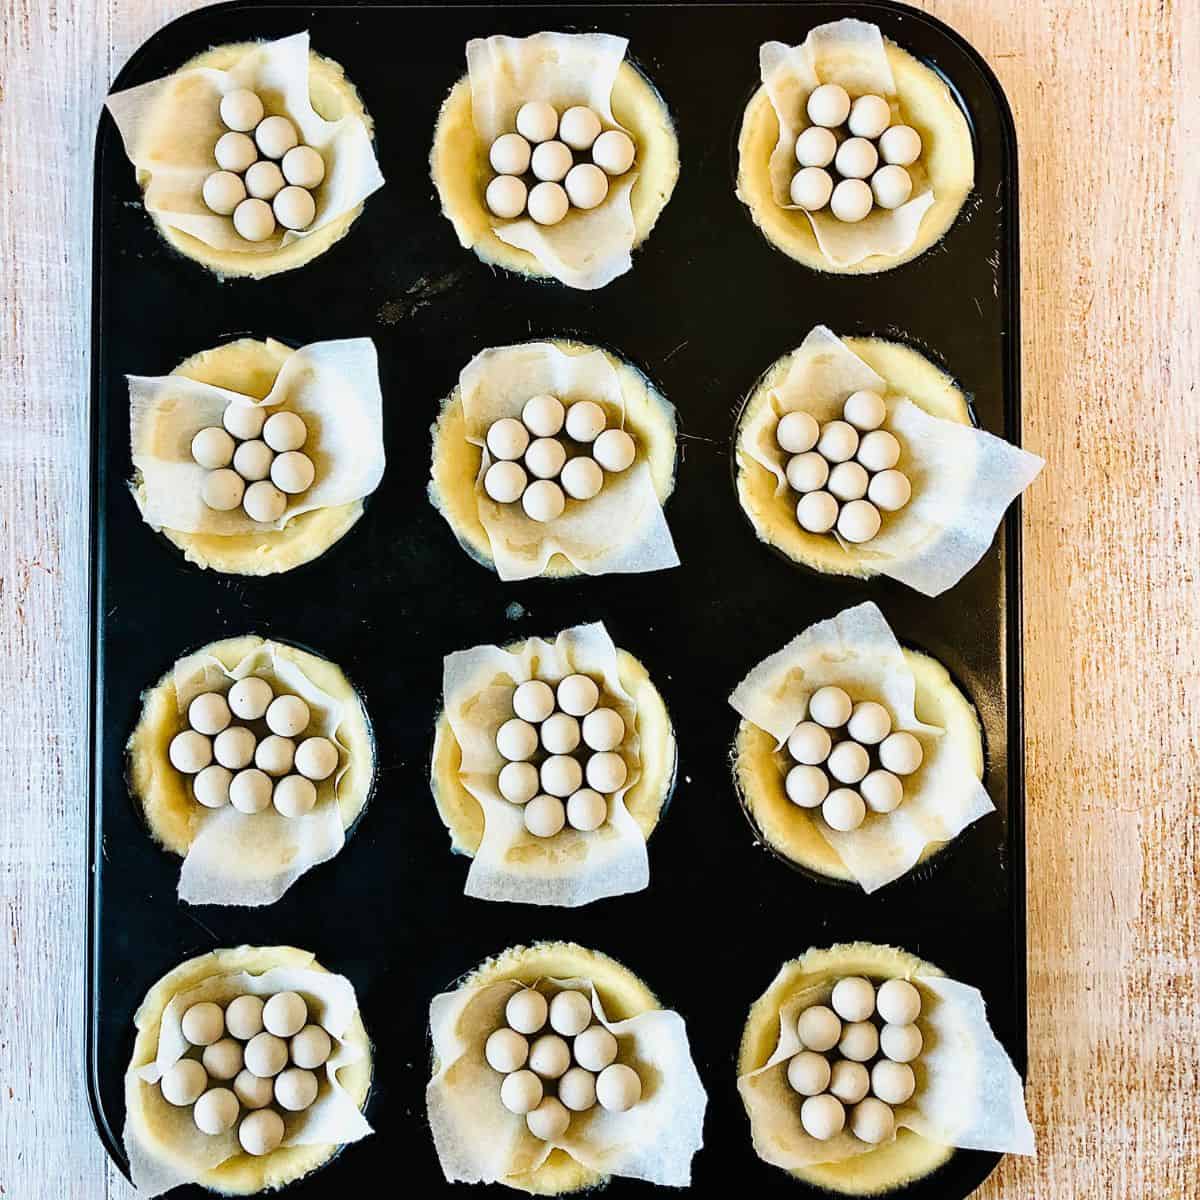 A tray of pastry tart bases with parchment paper and baking balls inside each ready for baking.